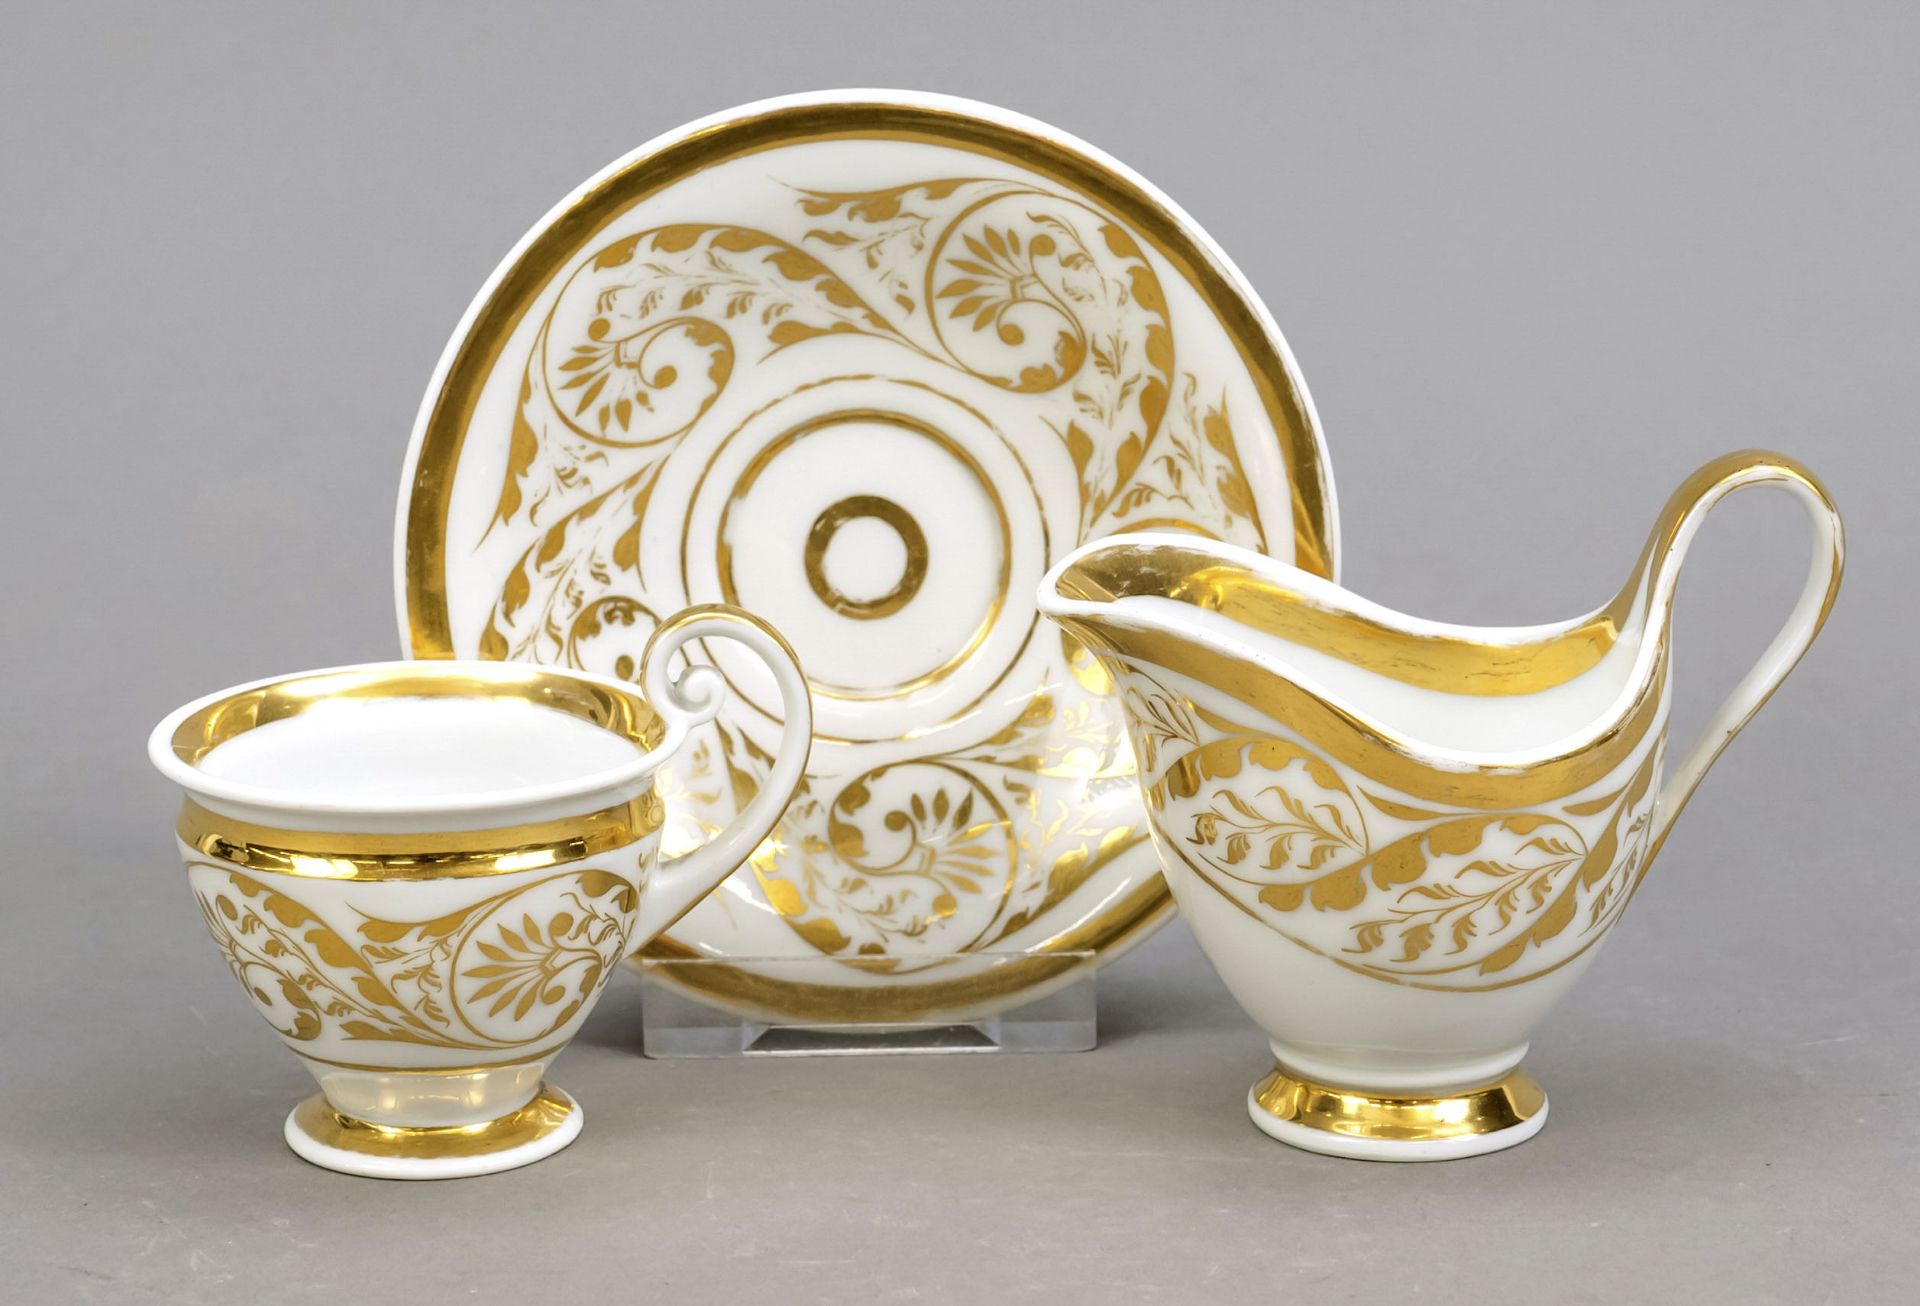 Demitasse with saucer and creamer, KPM Berlin, 1800-1830, bell-shaped cup with volute handle, gold